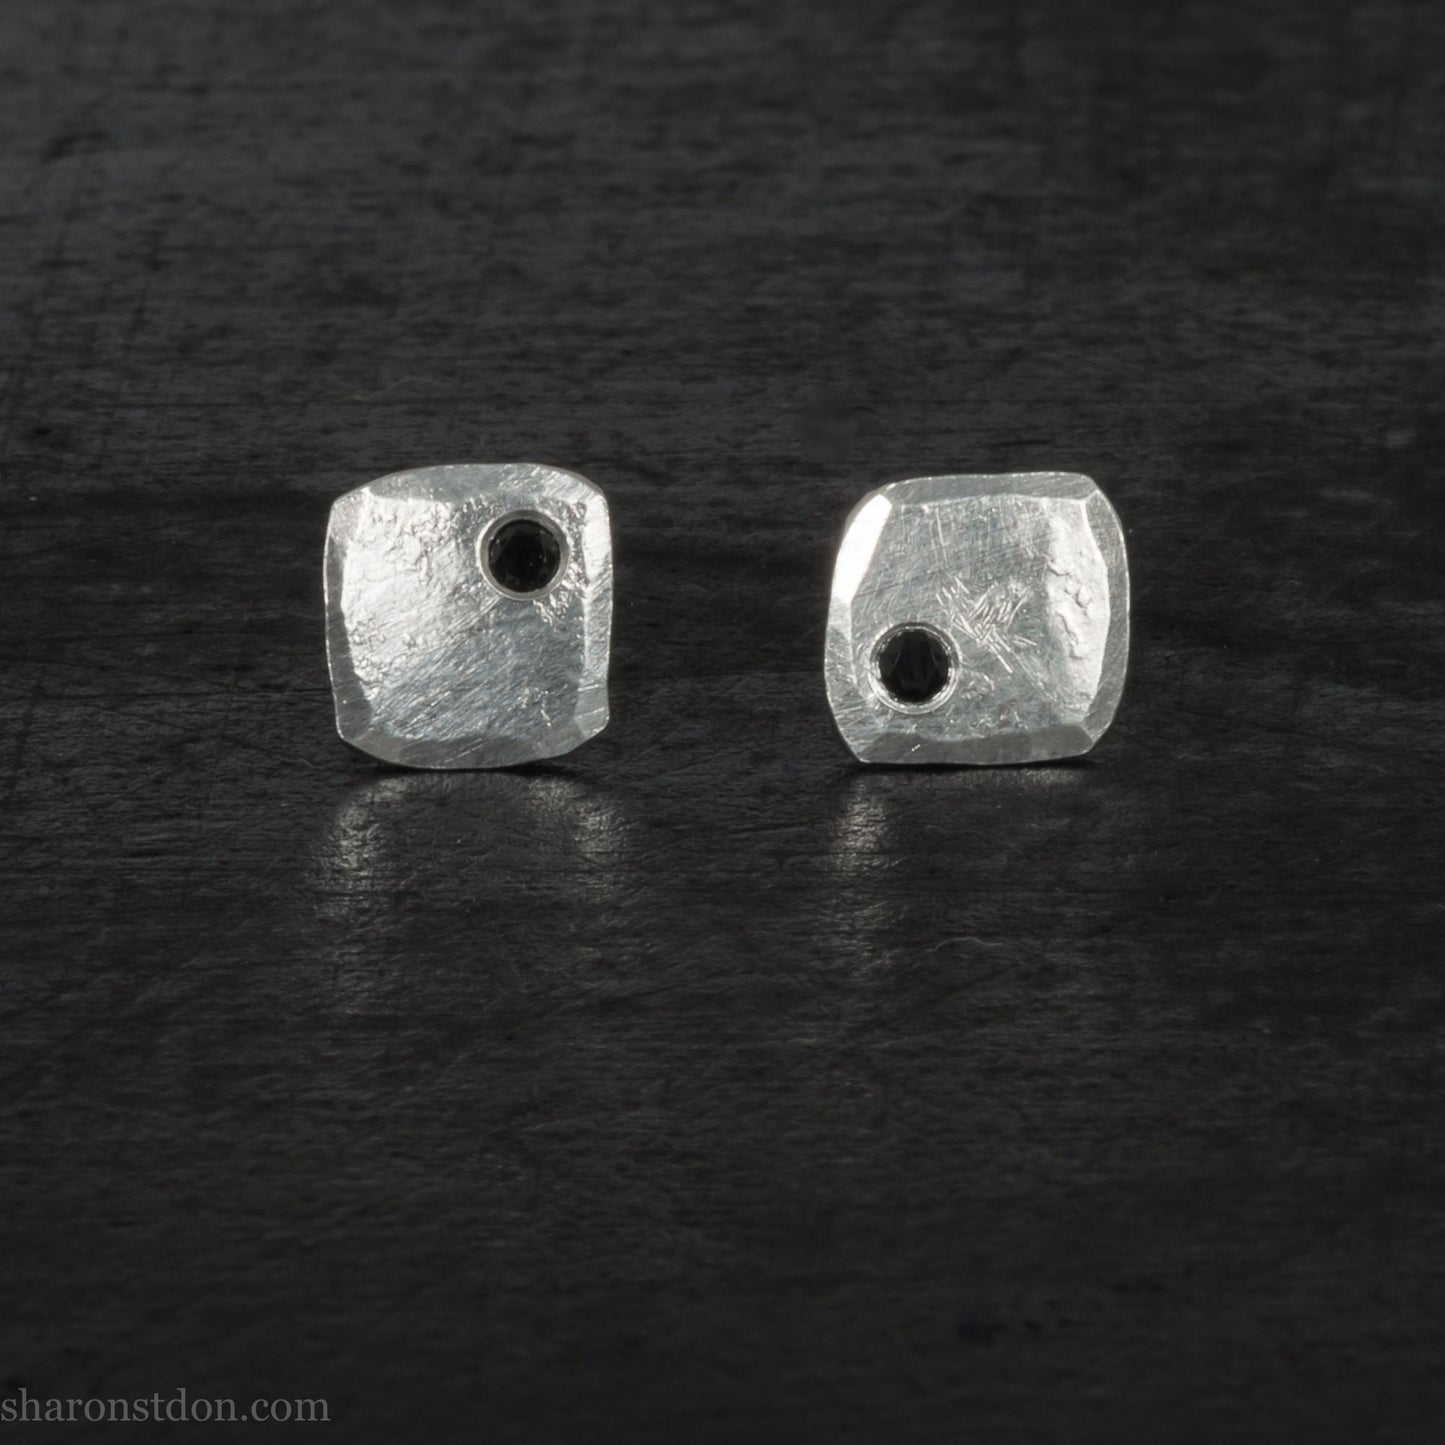 7mm square 925 sterling silver stud earrings with a black spinel gemstone in the corner. Hammered texture with a matte, brushed, shiny finish. Handmade by Sharon SaintDon in North America for men or women.